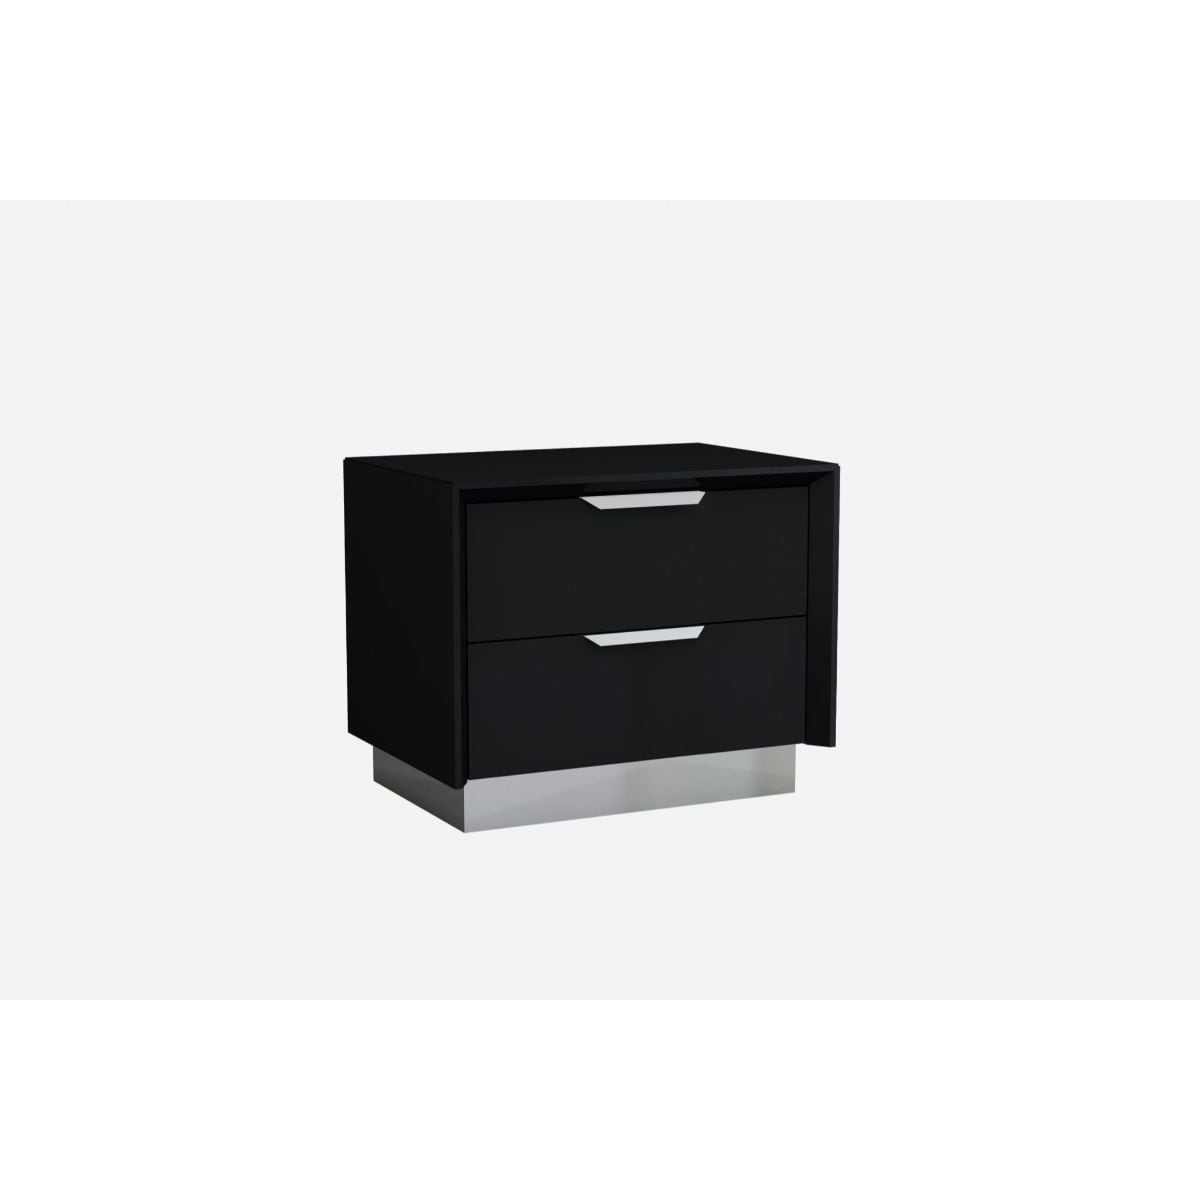 25-in X 17-in X 21-in Black Stainless Steel Nightstand - Contemporary Style with Self-Closing Drawers | - HomeRoots 370741